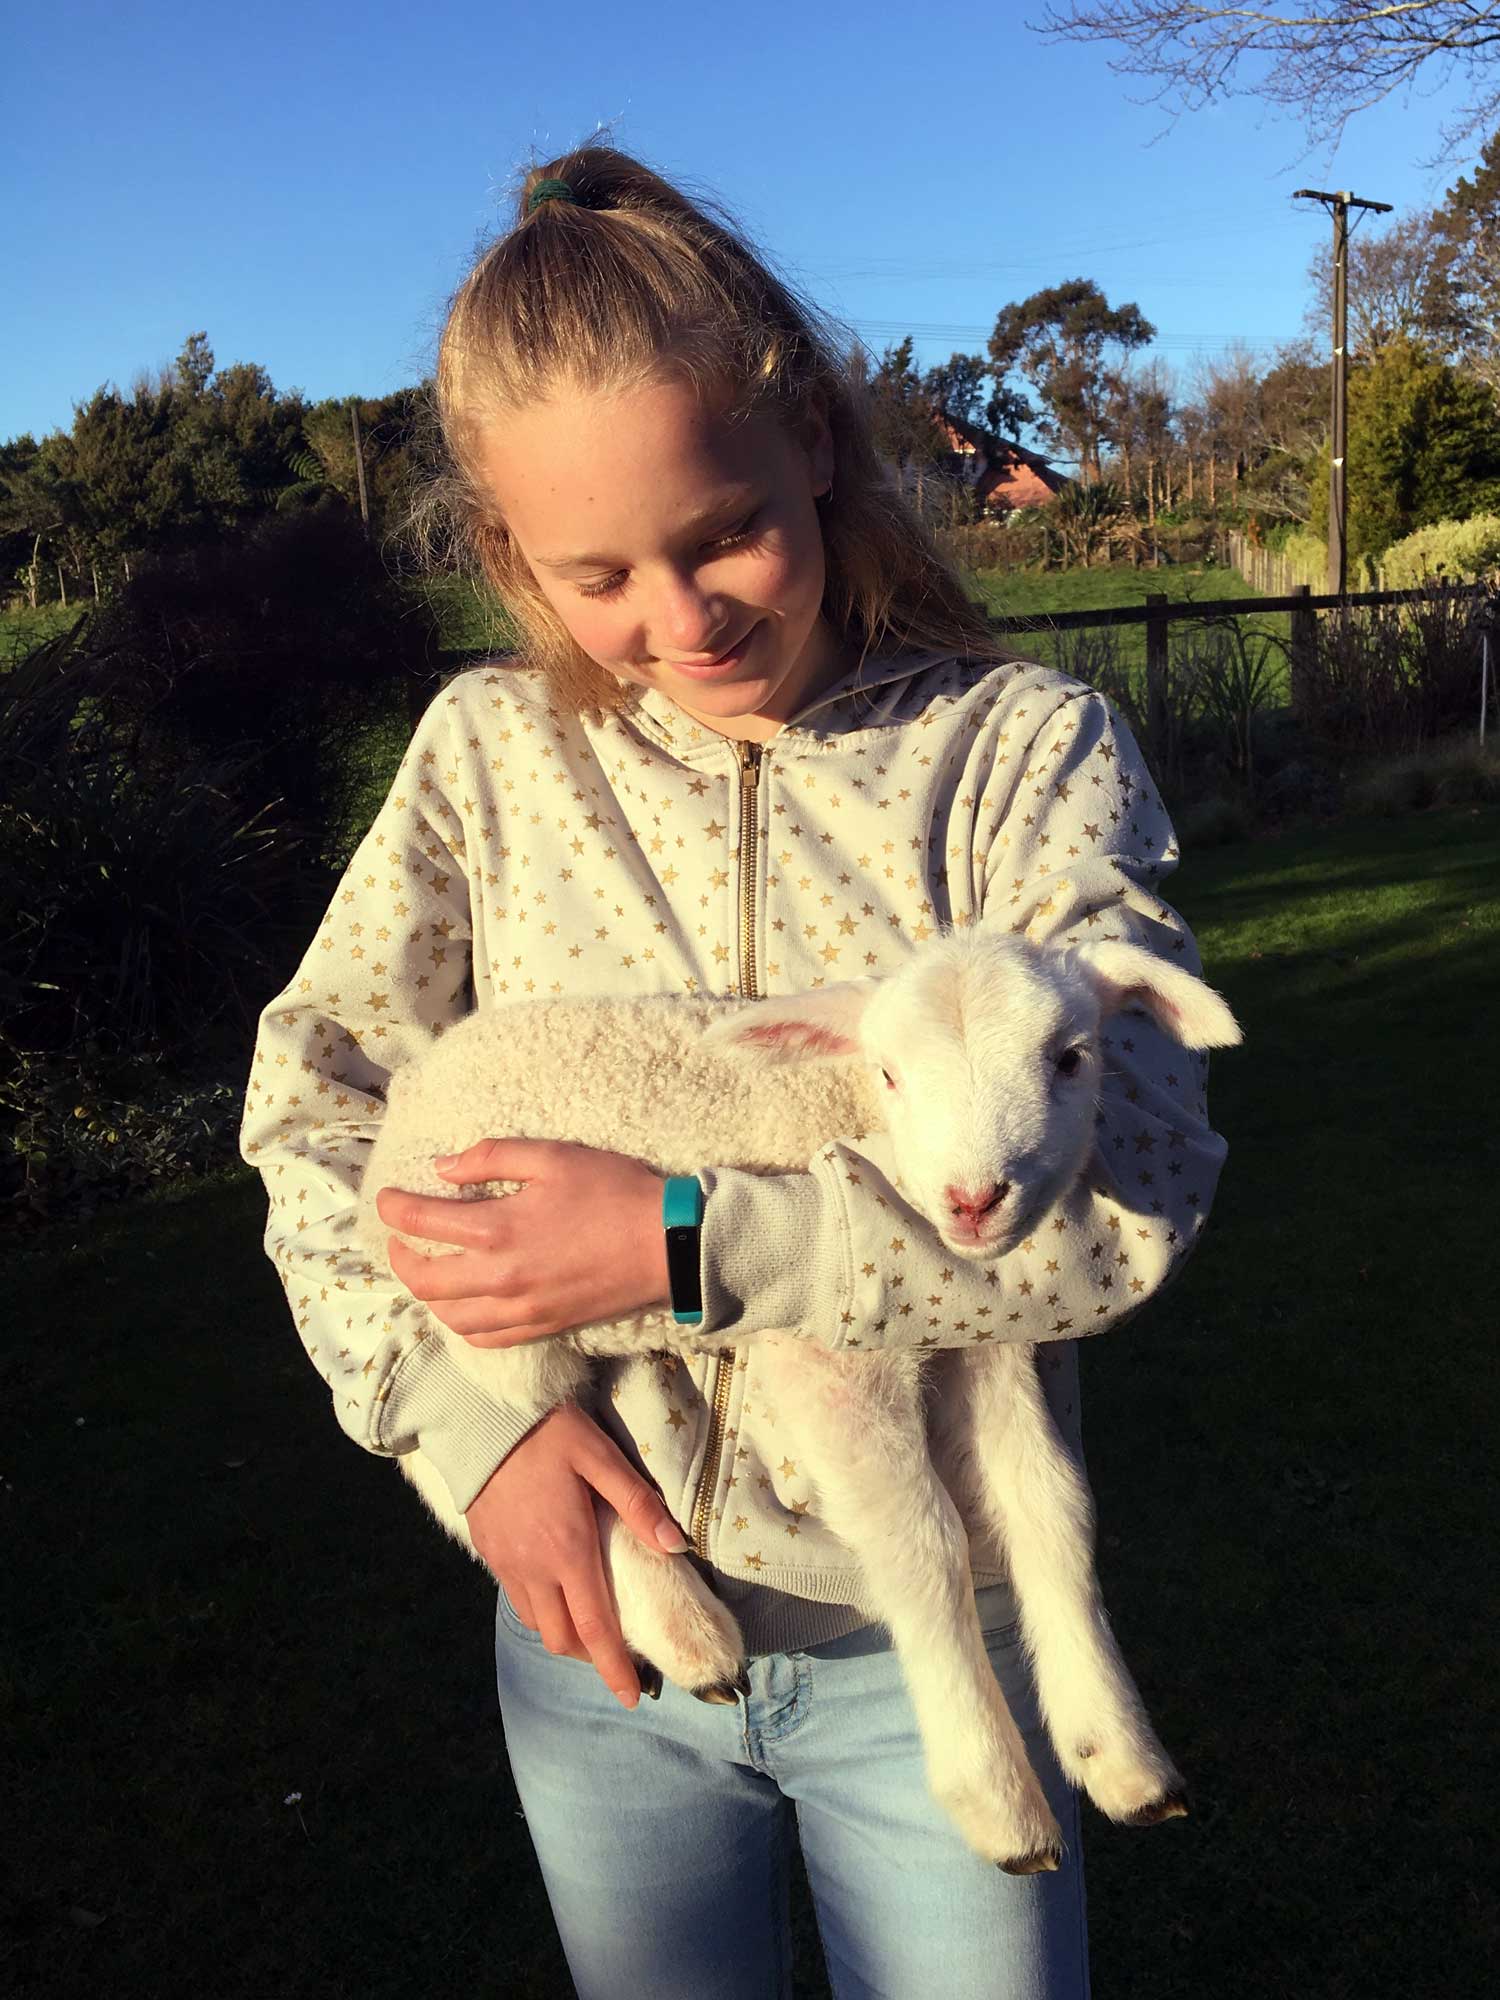 A lamb is held lovingly by a young lady who is smiling.